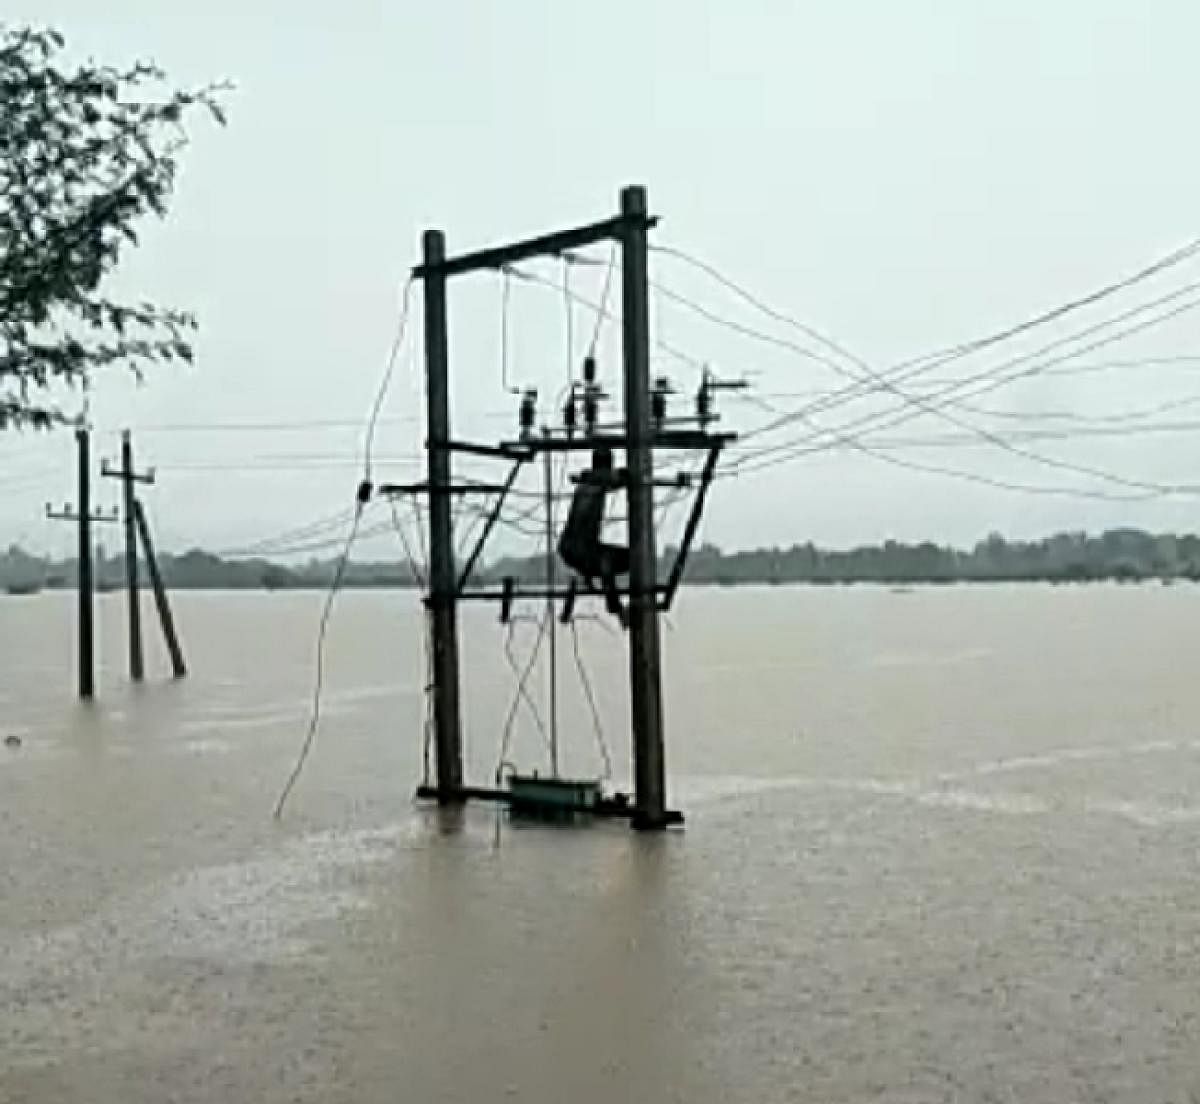 A Hescom lineman swims to reach an electricity pole marooned in tank water at Chikkonati near Hamsabhavi in Haveri district on Saturday, retrieves the electricity supply by repairing the power line, and swims back to safety. Credit: DH Photo